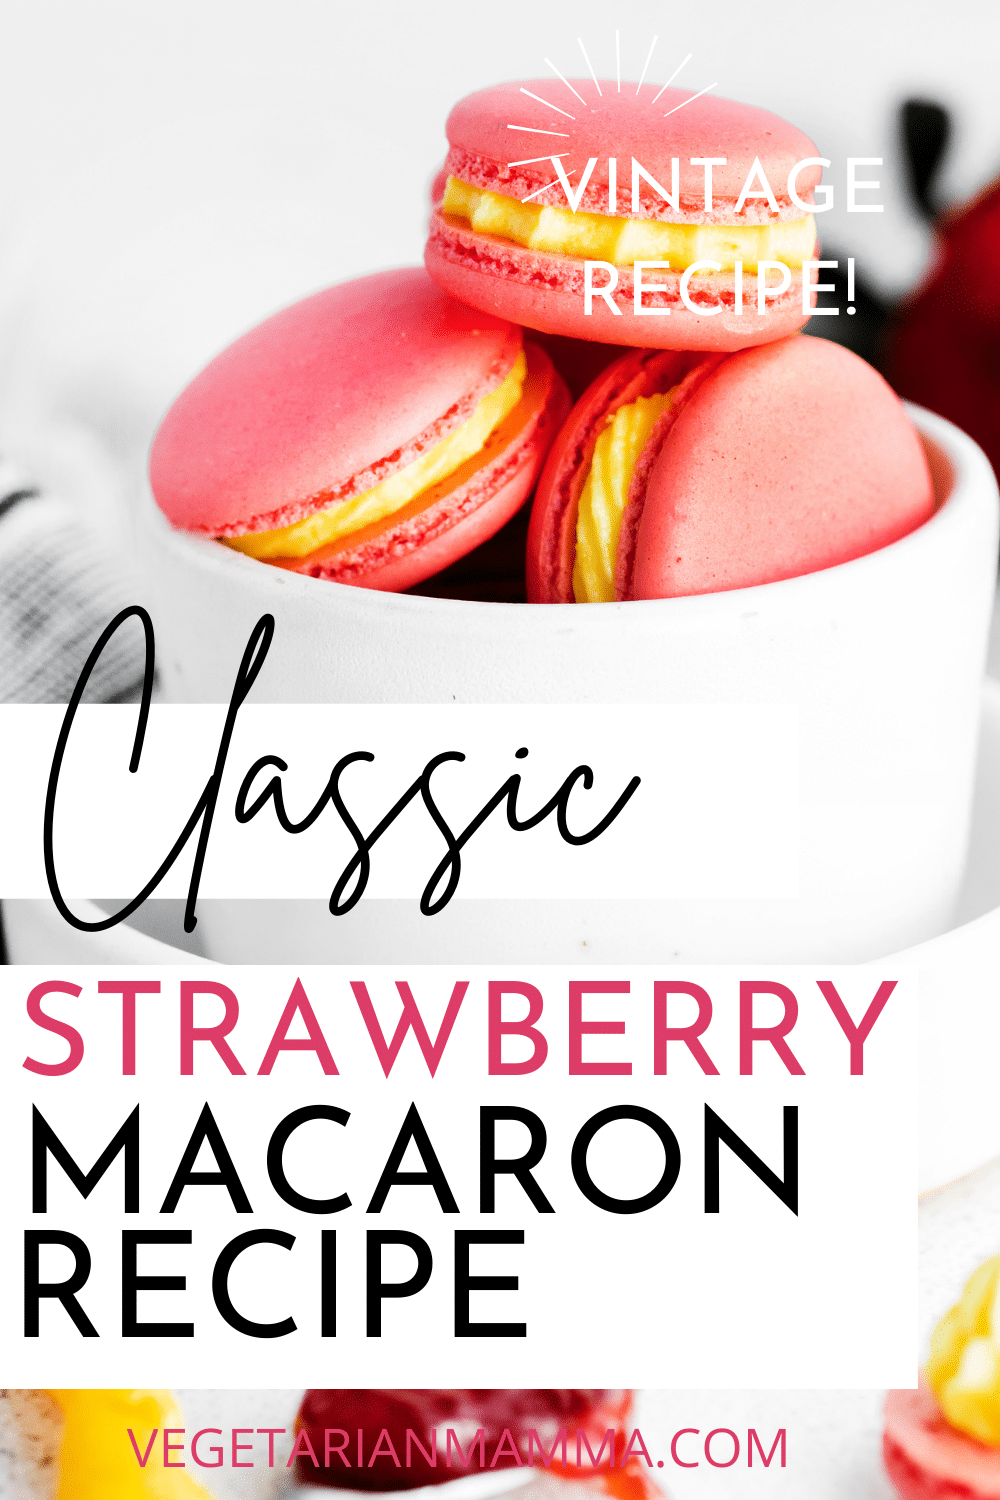 A classic recipe to make the best strawberry macarons! Chewy and light, filled with a tart and sweet lemon frosting and strawberry jam filling.